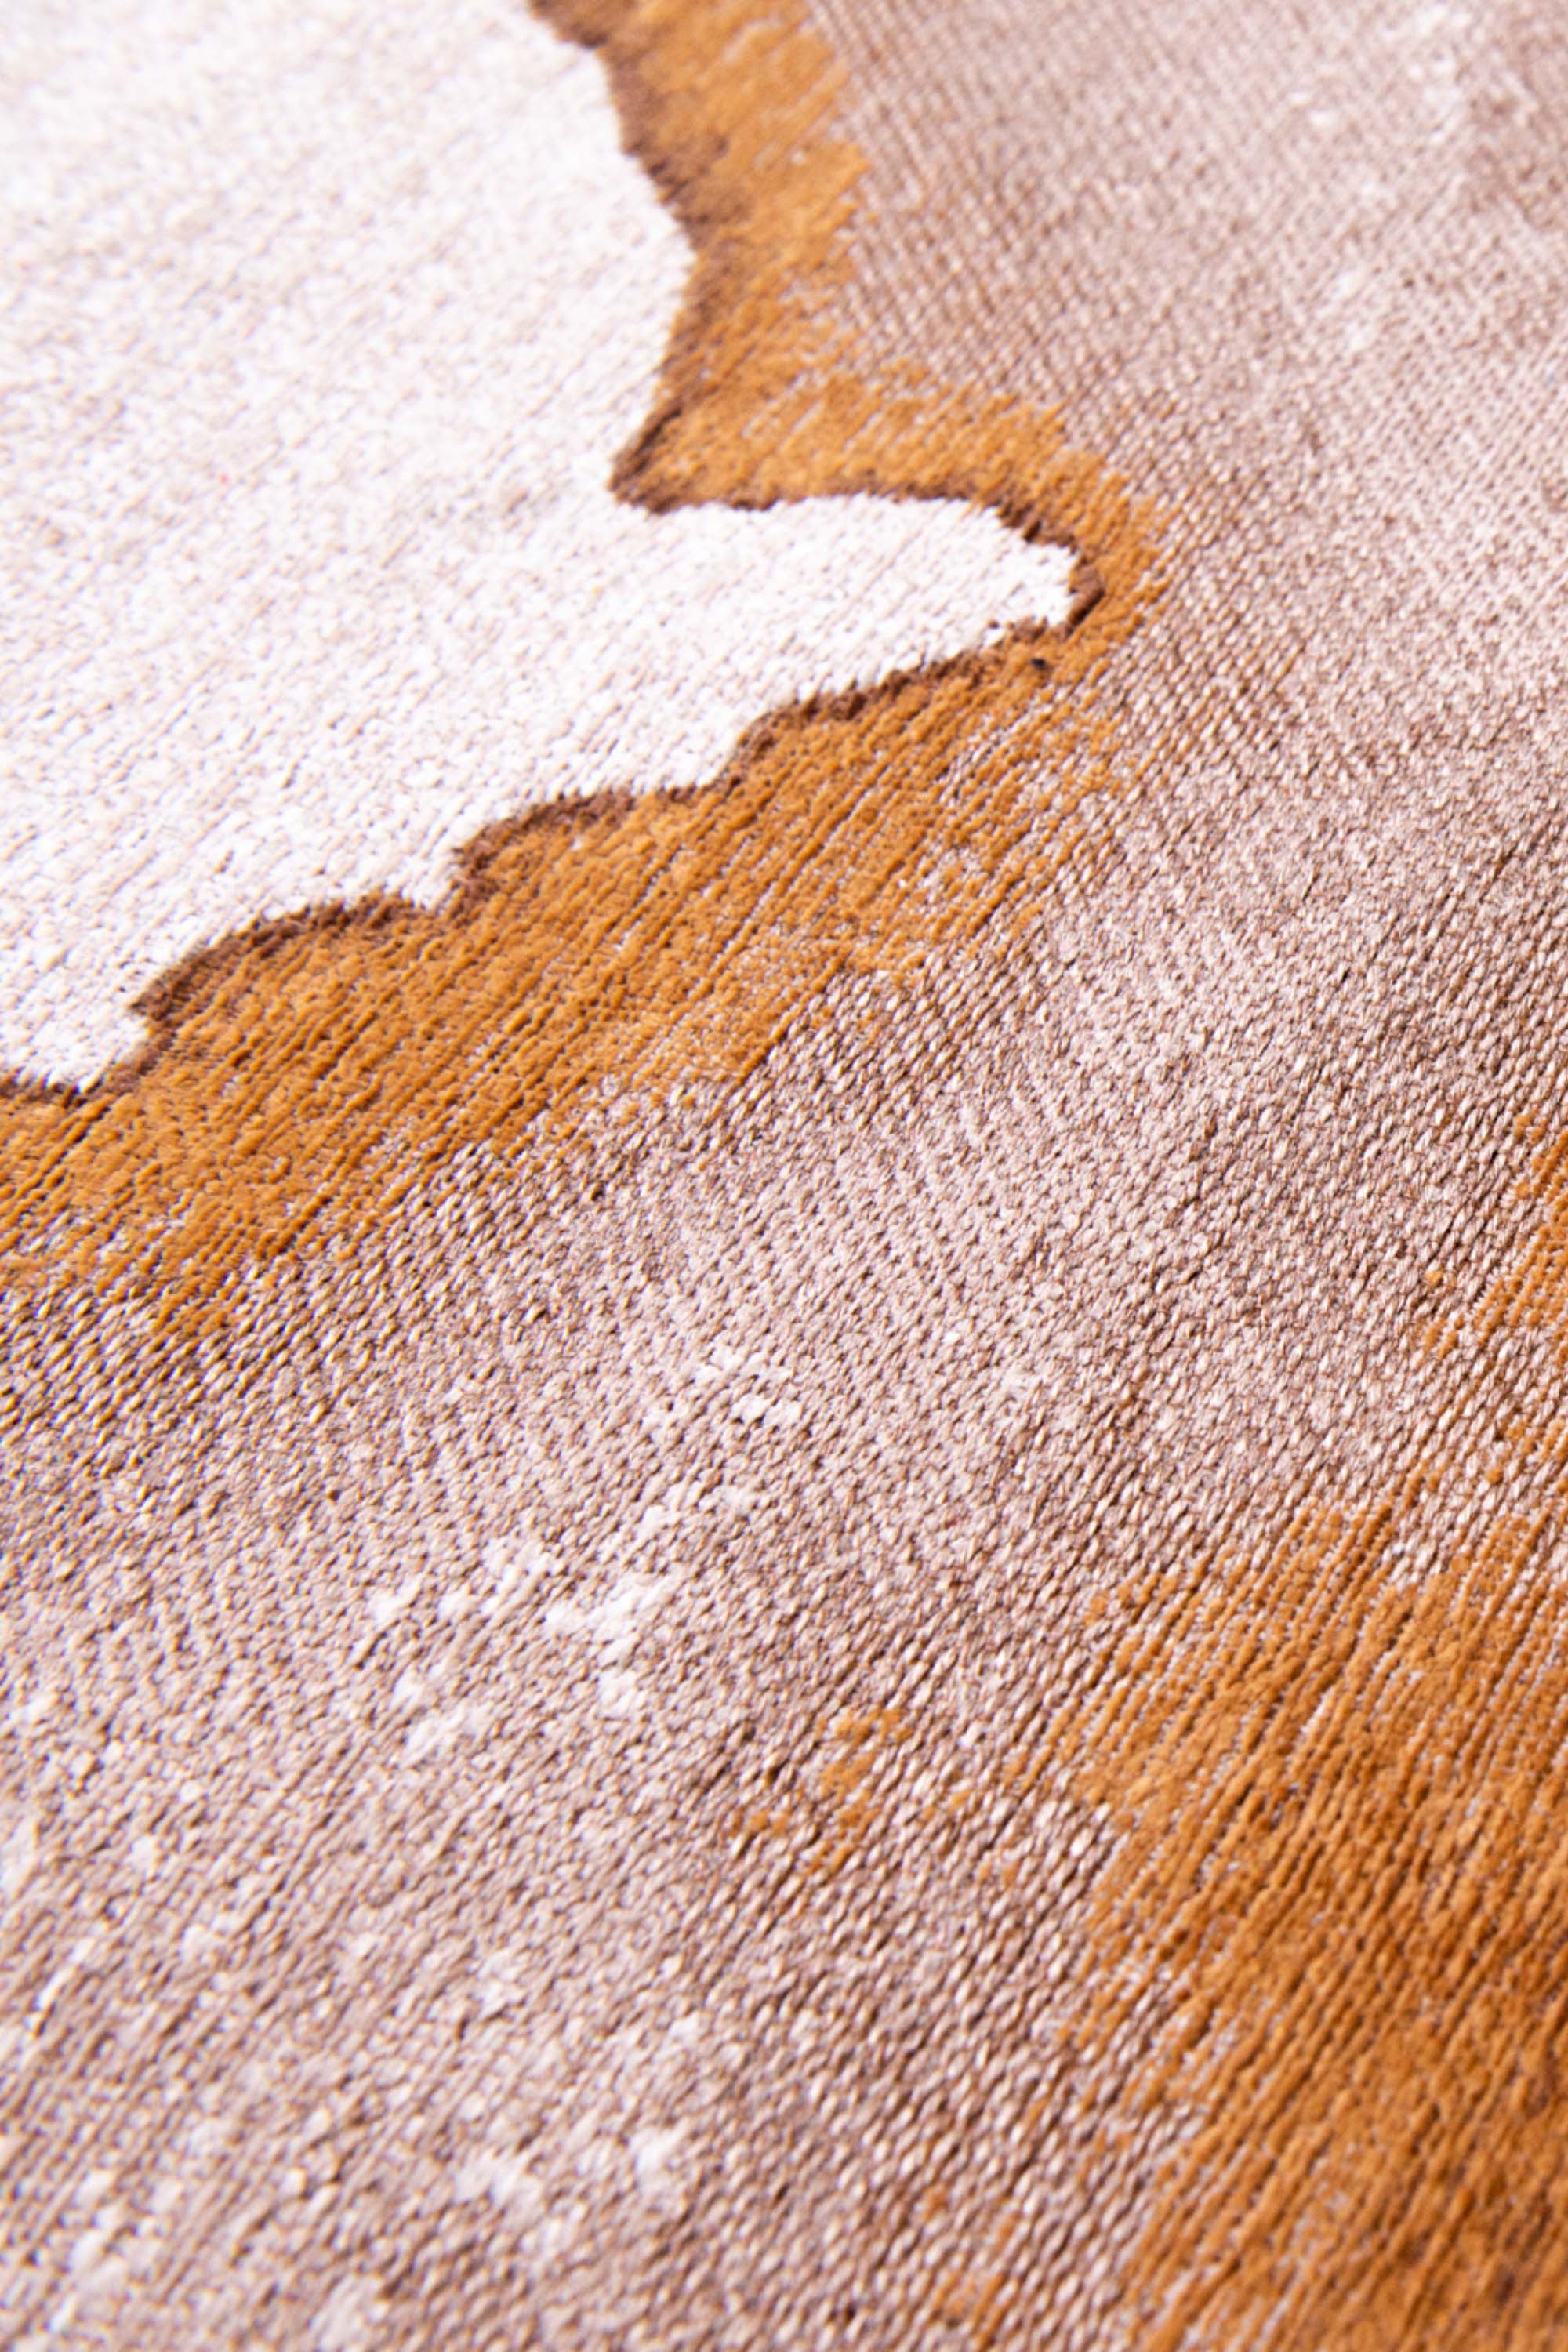 Modern rug with brown abstract shoreline pattern